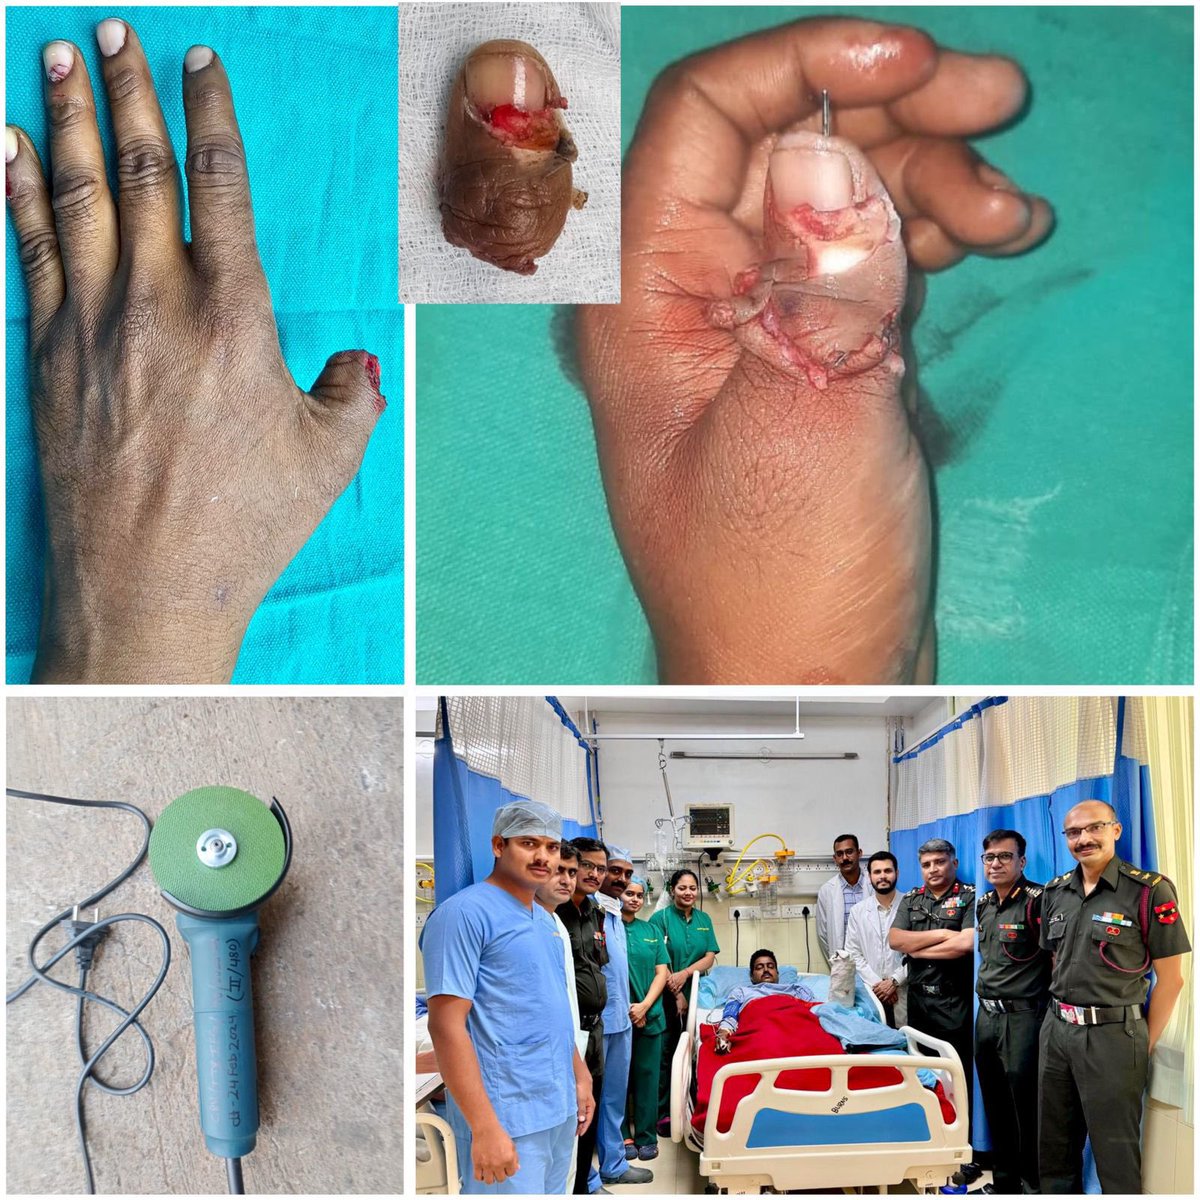 #CommandHospital #Pune, successfully performed reconstructive surgery on a 29-year-old serving soldier who sustained the amputation of his left thumb while operating an electric grinder at Devlali Cantonment on April 15th. The team conducted reattachment microsurgery on the